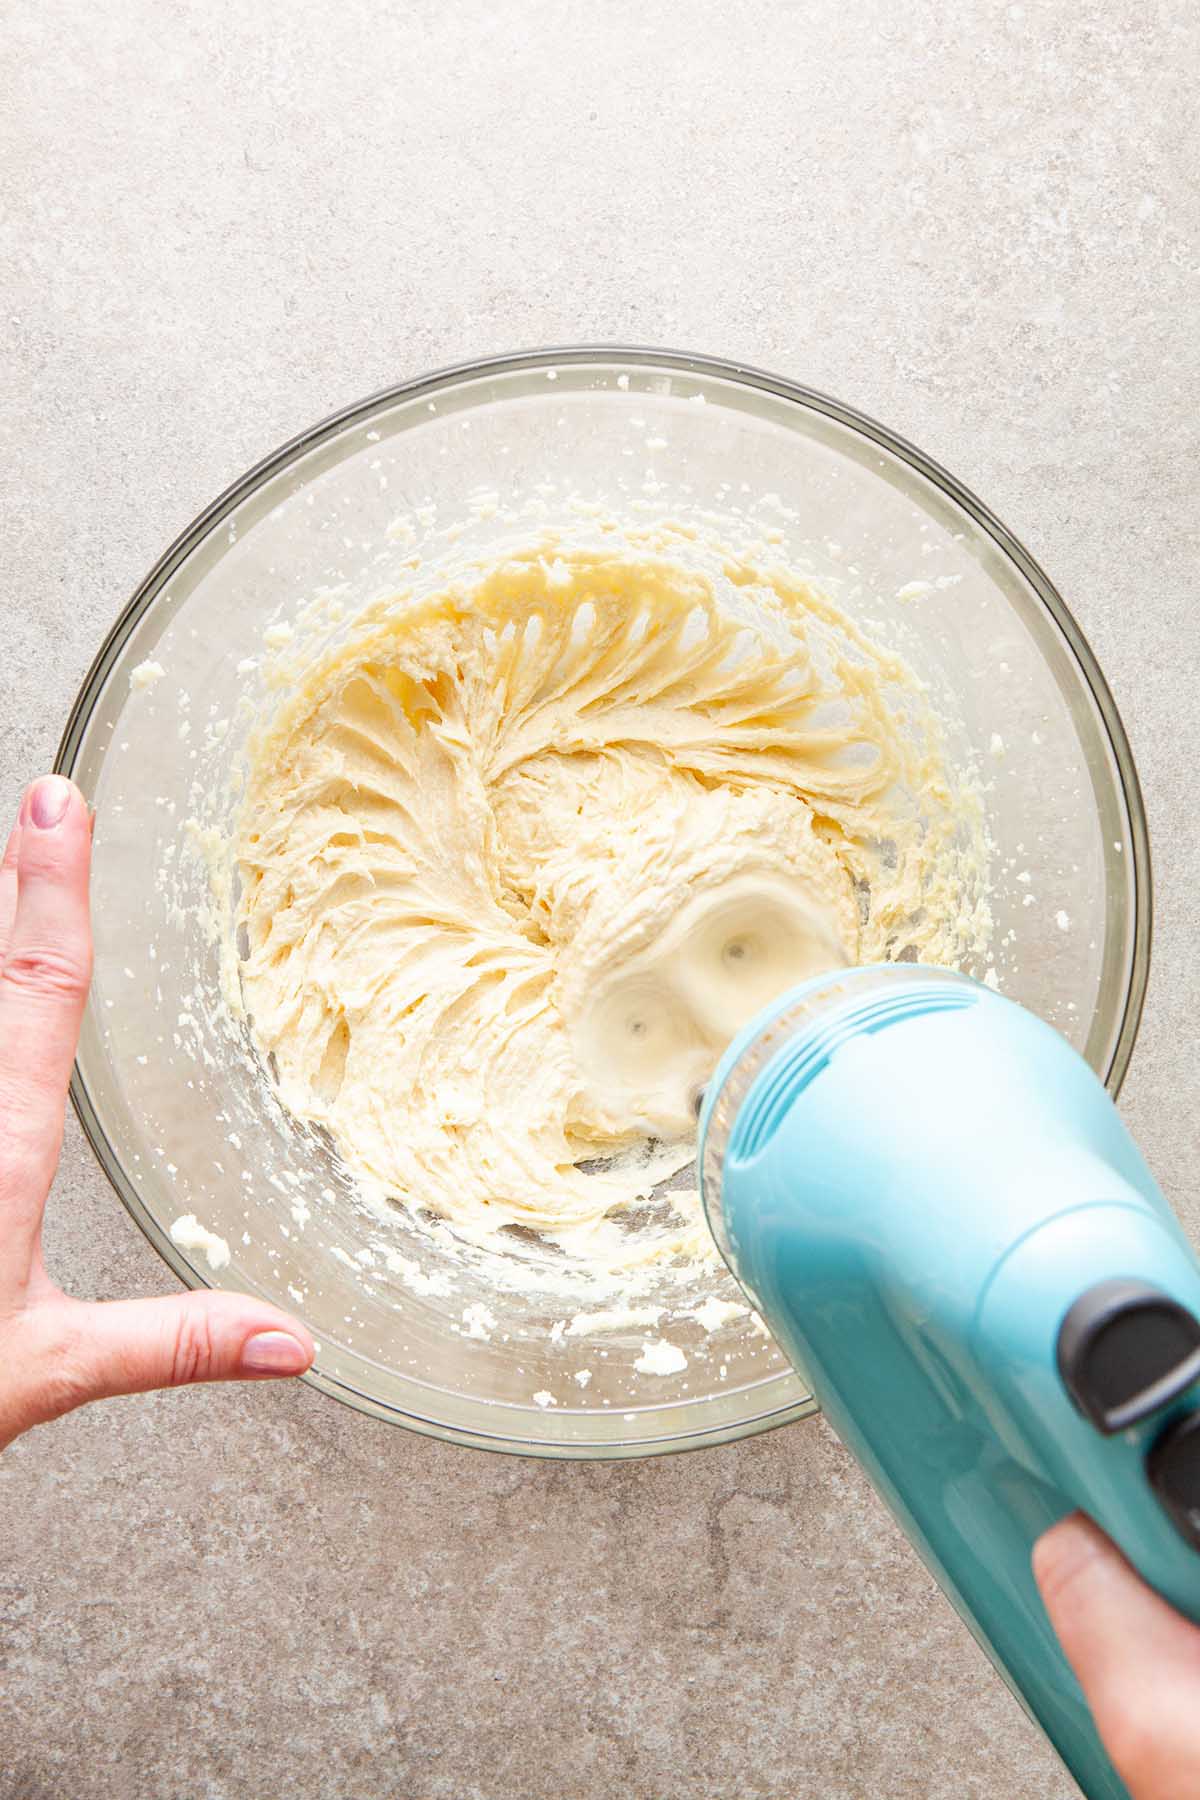 A hand using a hand mixer to cream butter and sugar.